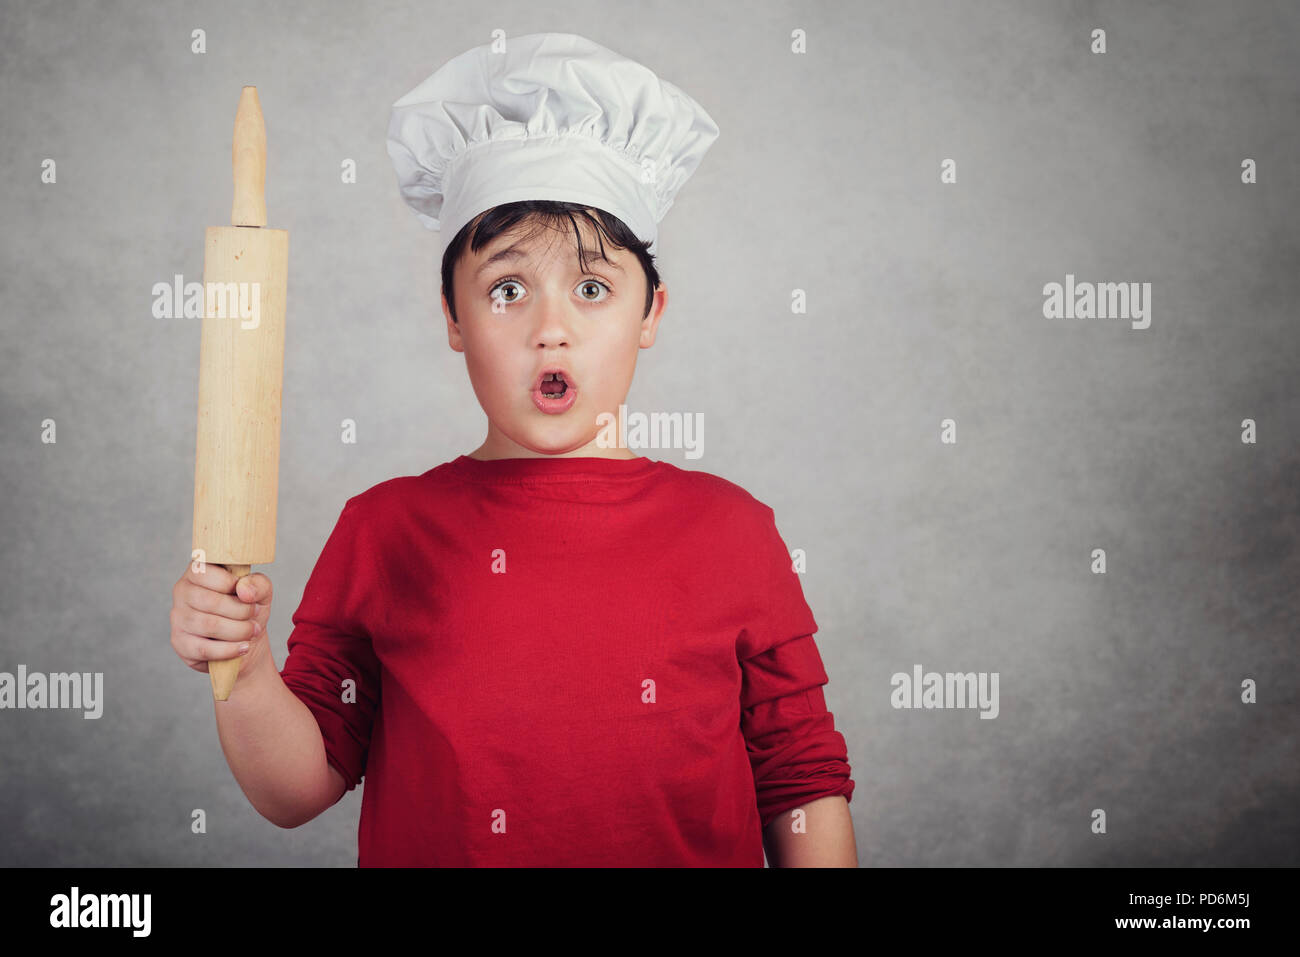 child cook surprised with a rolling pin on gray background Stock Photo